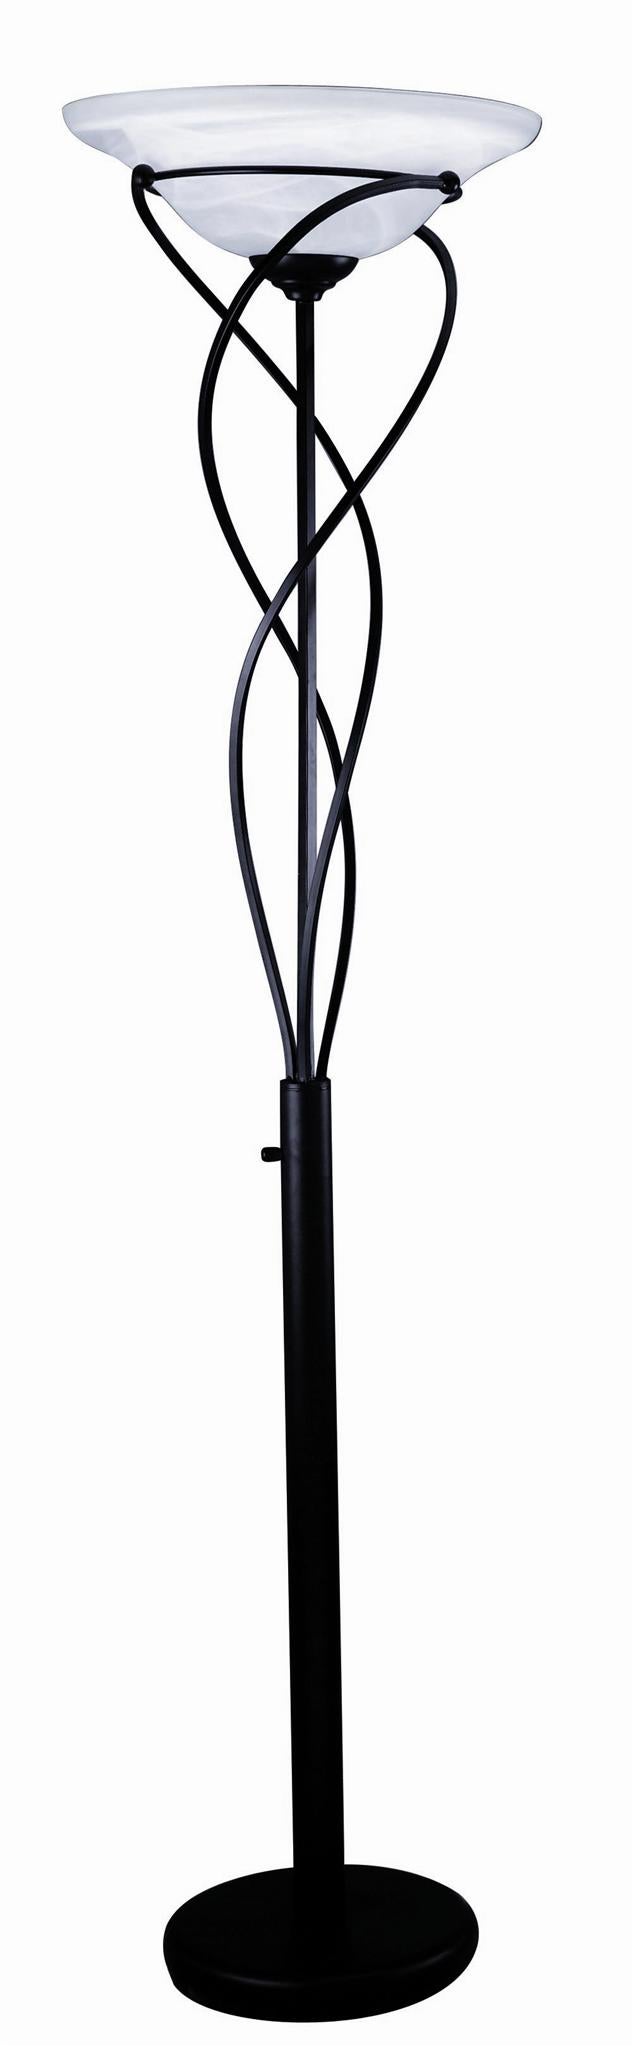 MAJESTY Floor Lamp - torch lamps | Lite Source Inc.